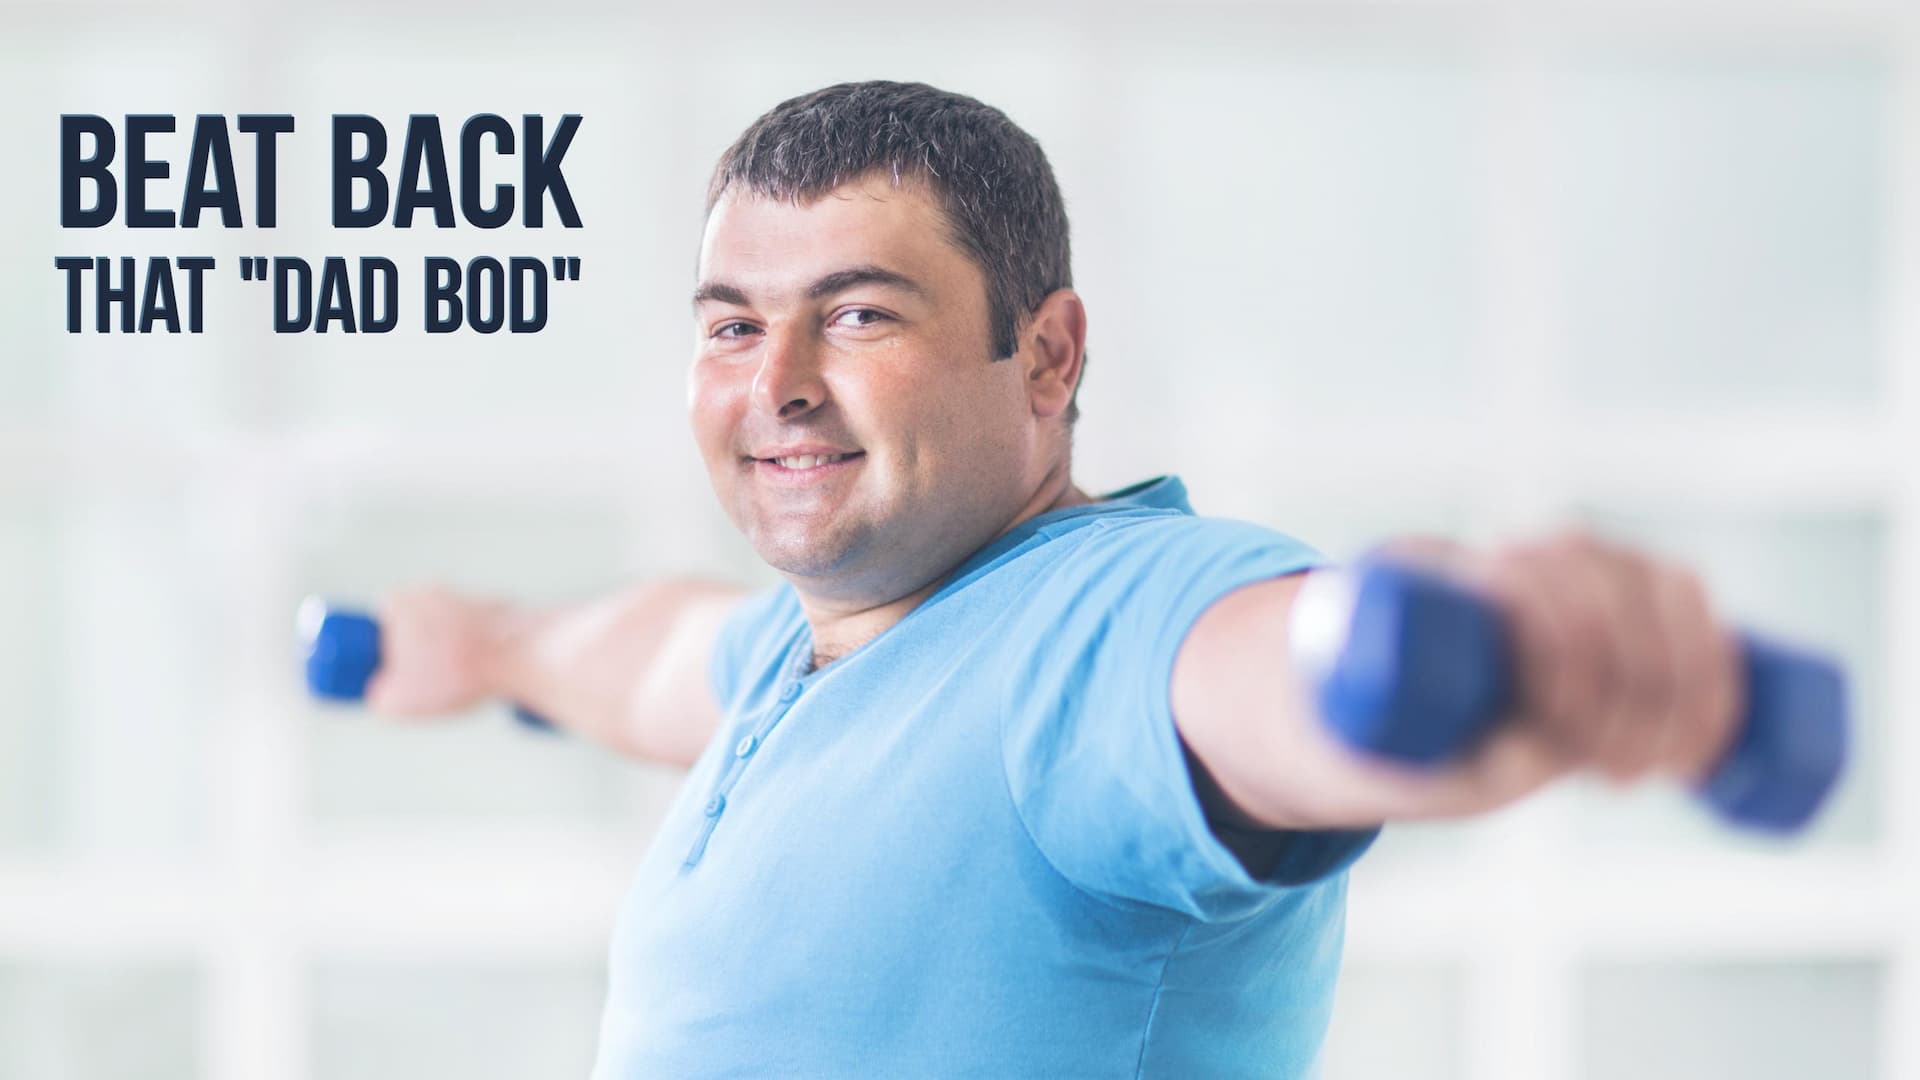 Three Practical Steps to Conquer Your 'Dad Bod' - It's not as hard as you might think